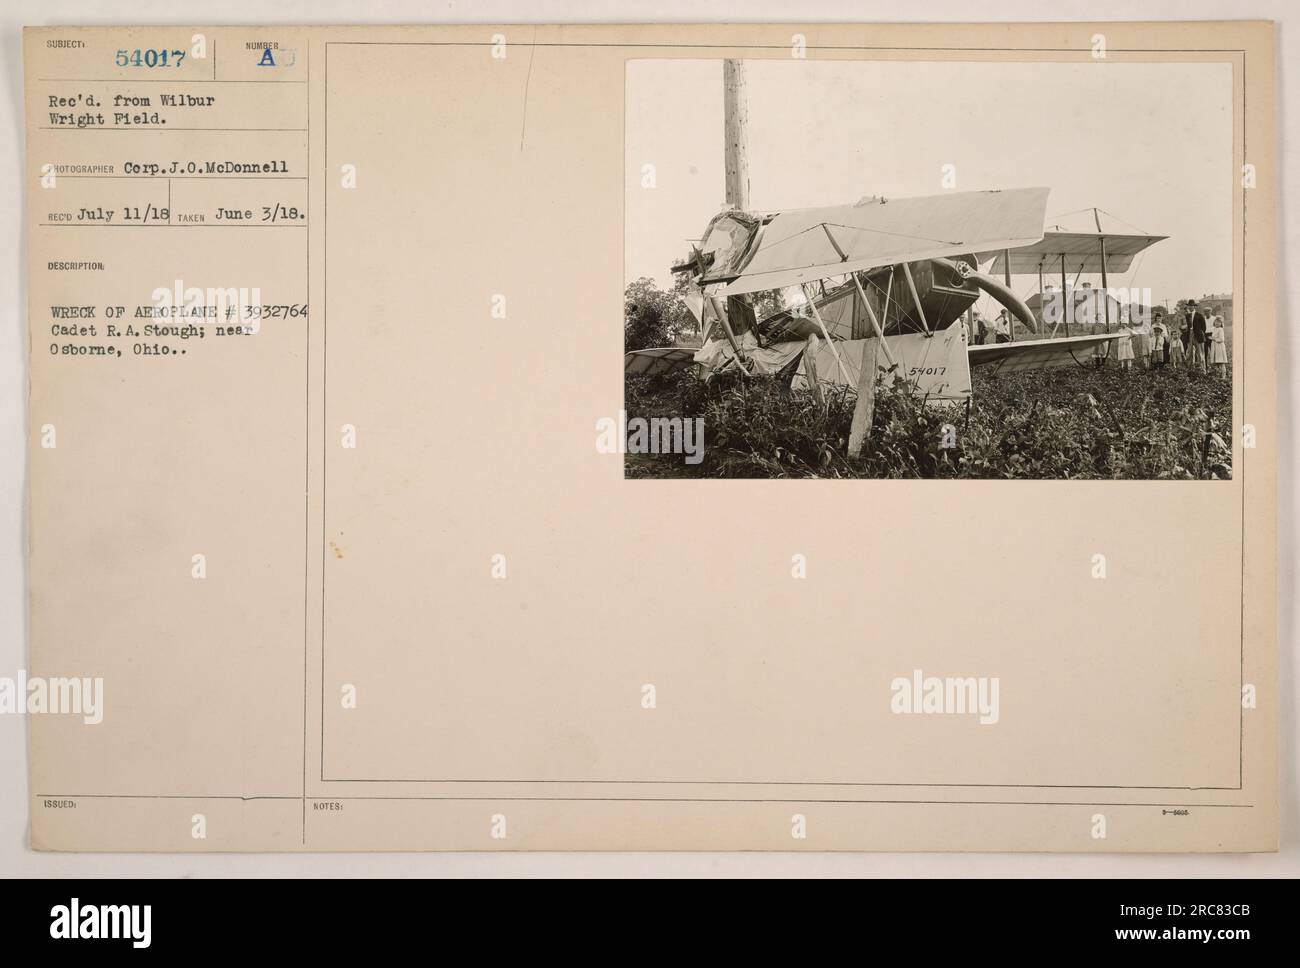 This photograph shows the wreck of Aeroplane #3932764, belonging to Cadet R.A. Stough, near Osborne, Ohio. It was received from Wilbur Wright Field and taken on June 3, 1918, by Corporal J.O. McDonnell. The photo was issued with the notes reference number 54017. Stock Photo